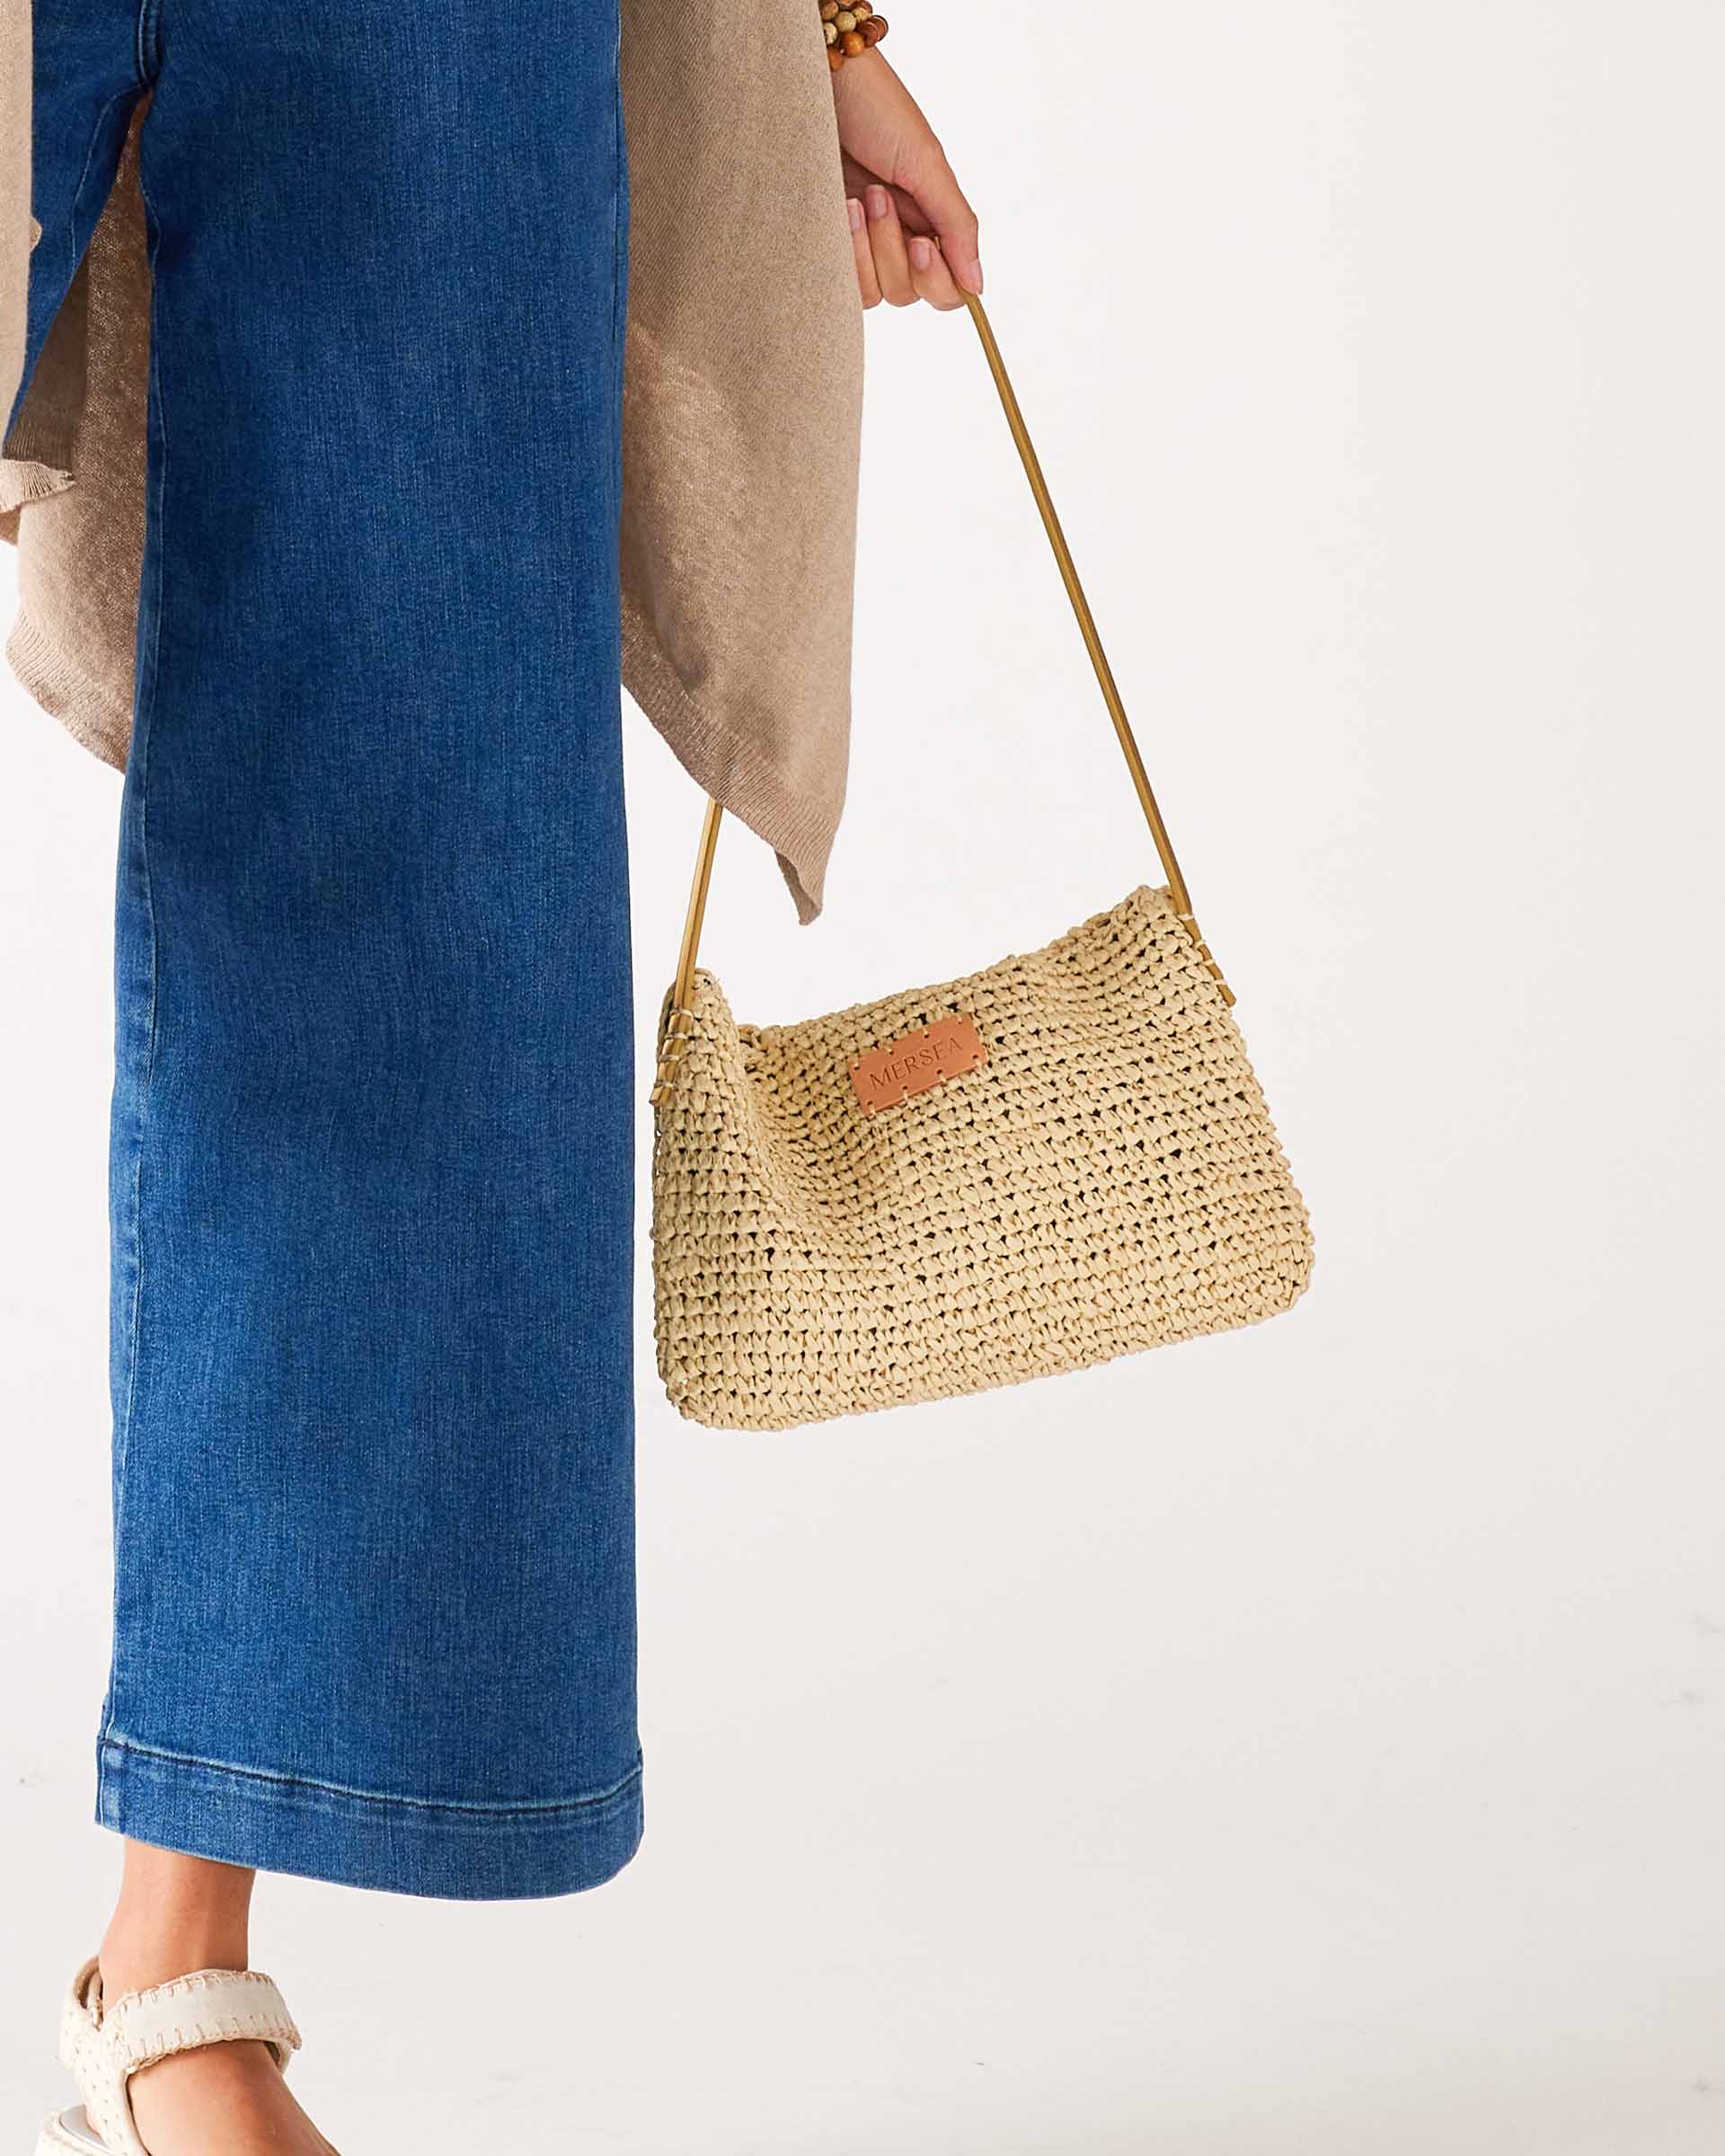 close up image of woman holding sun chaser straw pochette